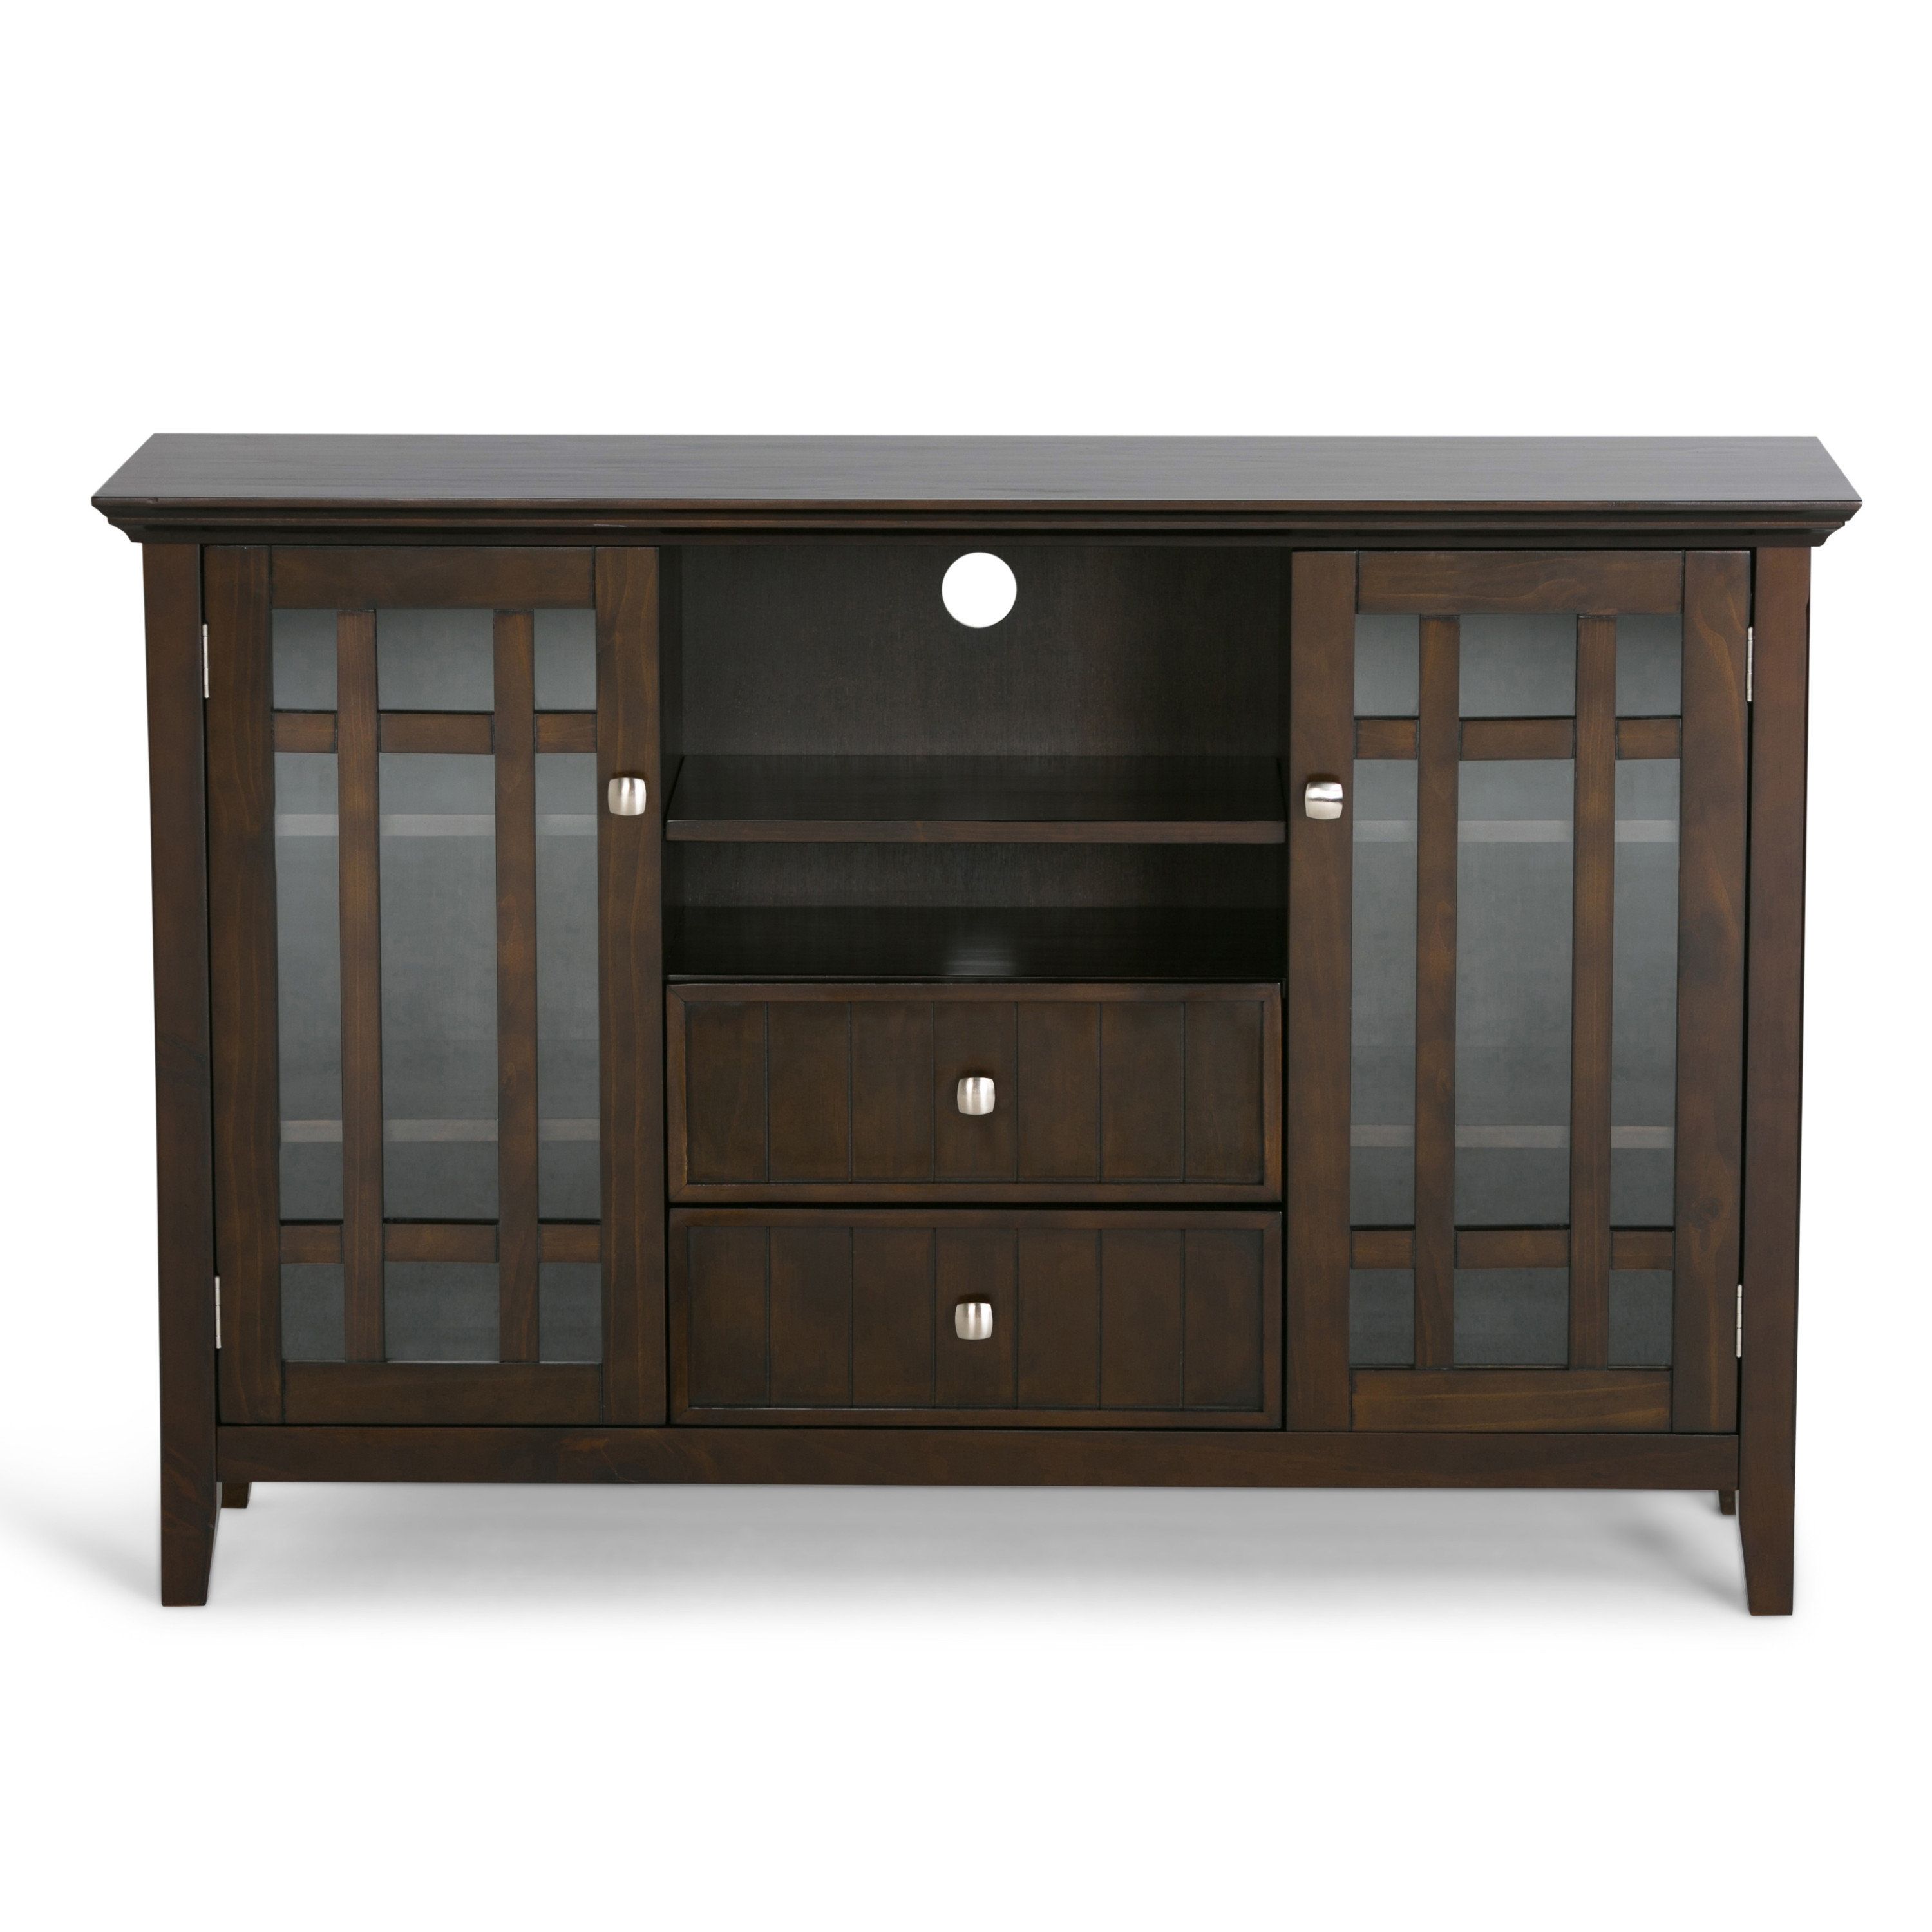 Bedford Tv Stands Within Most Up To Date Simpli Home Bedford Tv Stand For Tvs Up To 50" & Reviews (Photo 1 of 20)